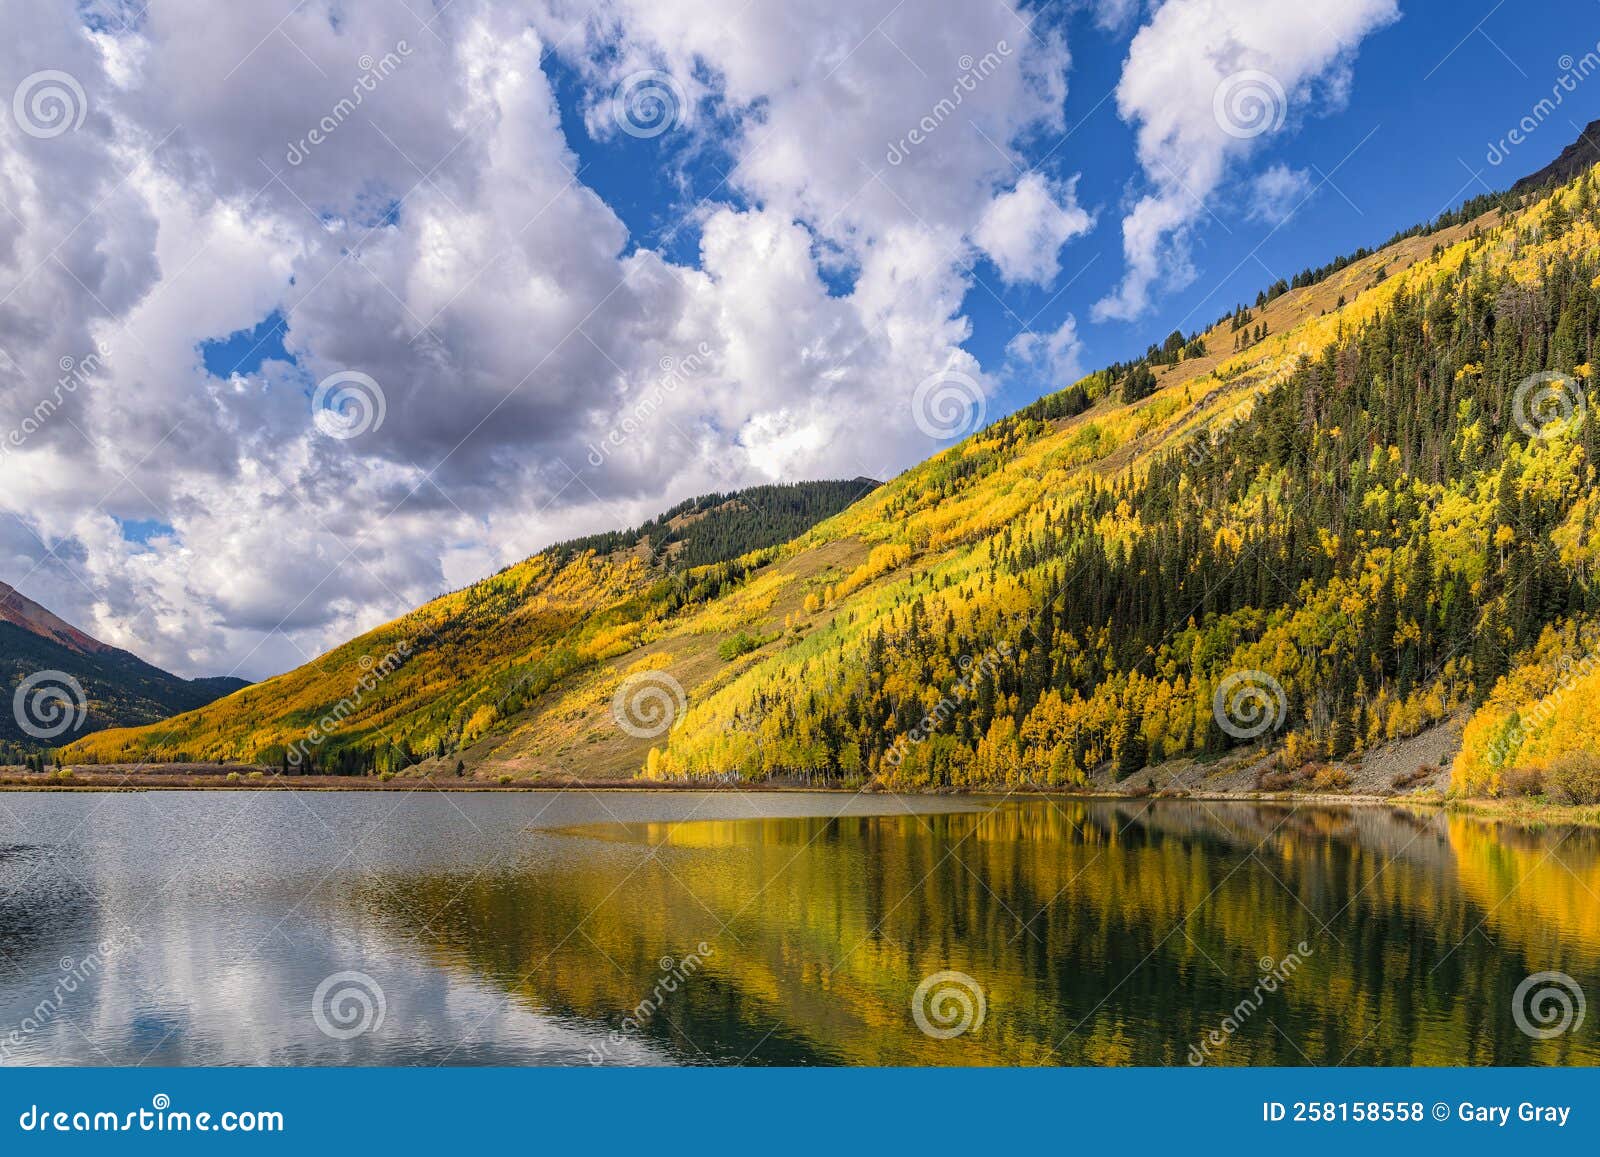 beautiful autumn color in the colorado rocky mountains. reflections on crystal lake near ouray, colorado